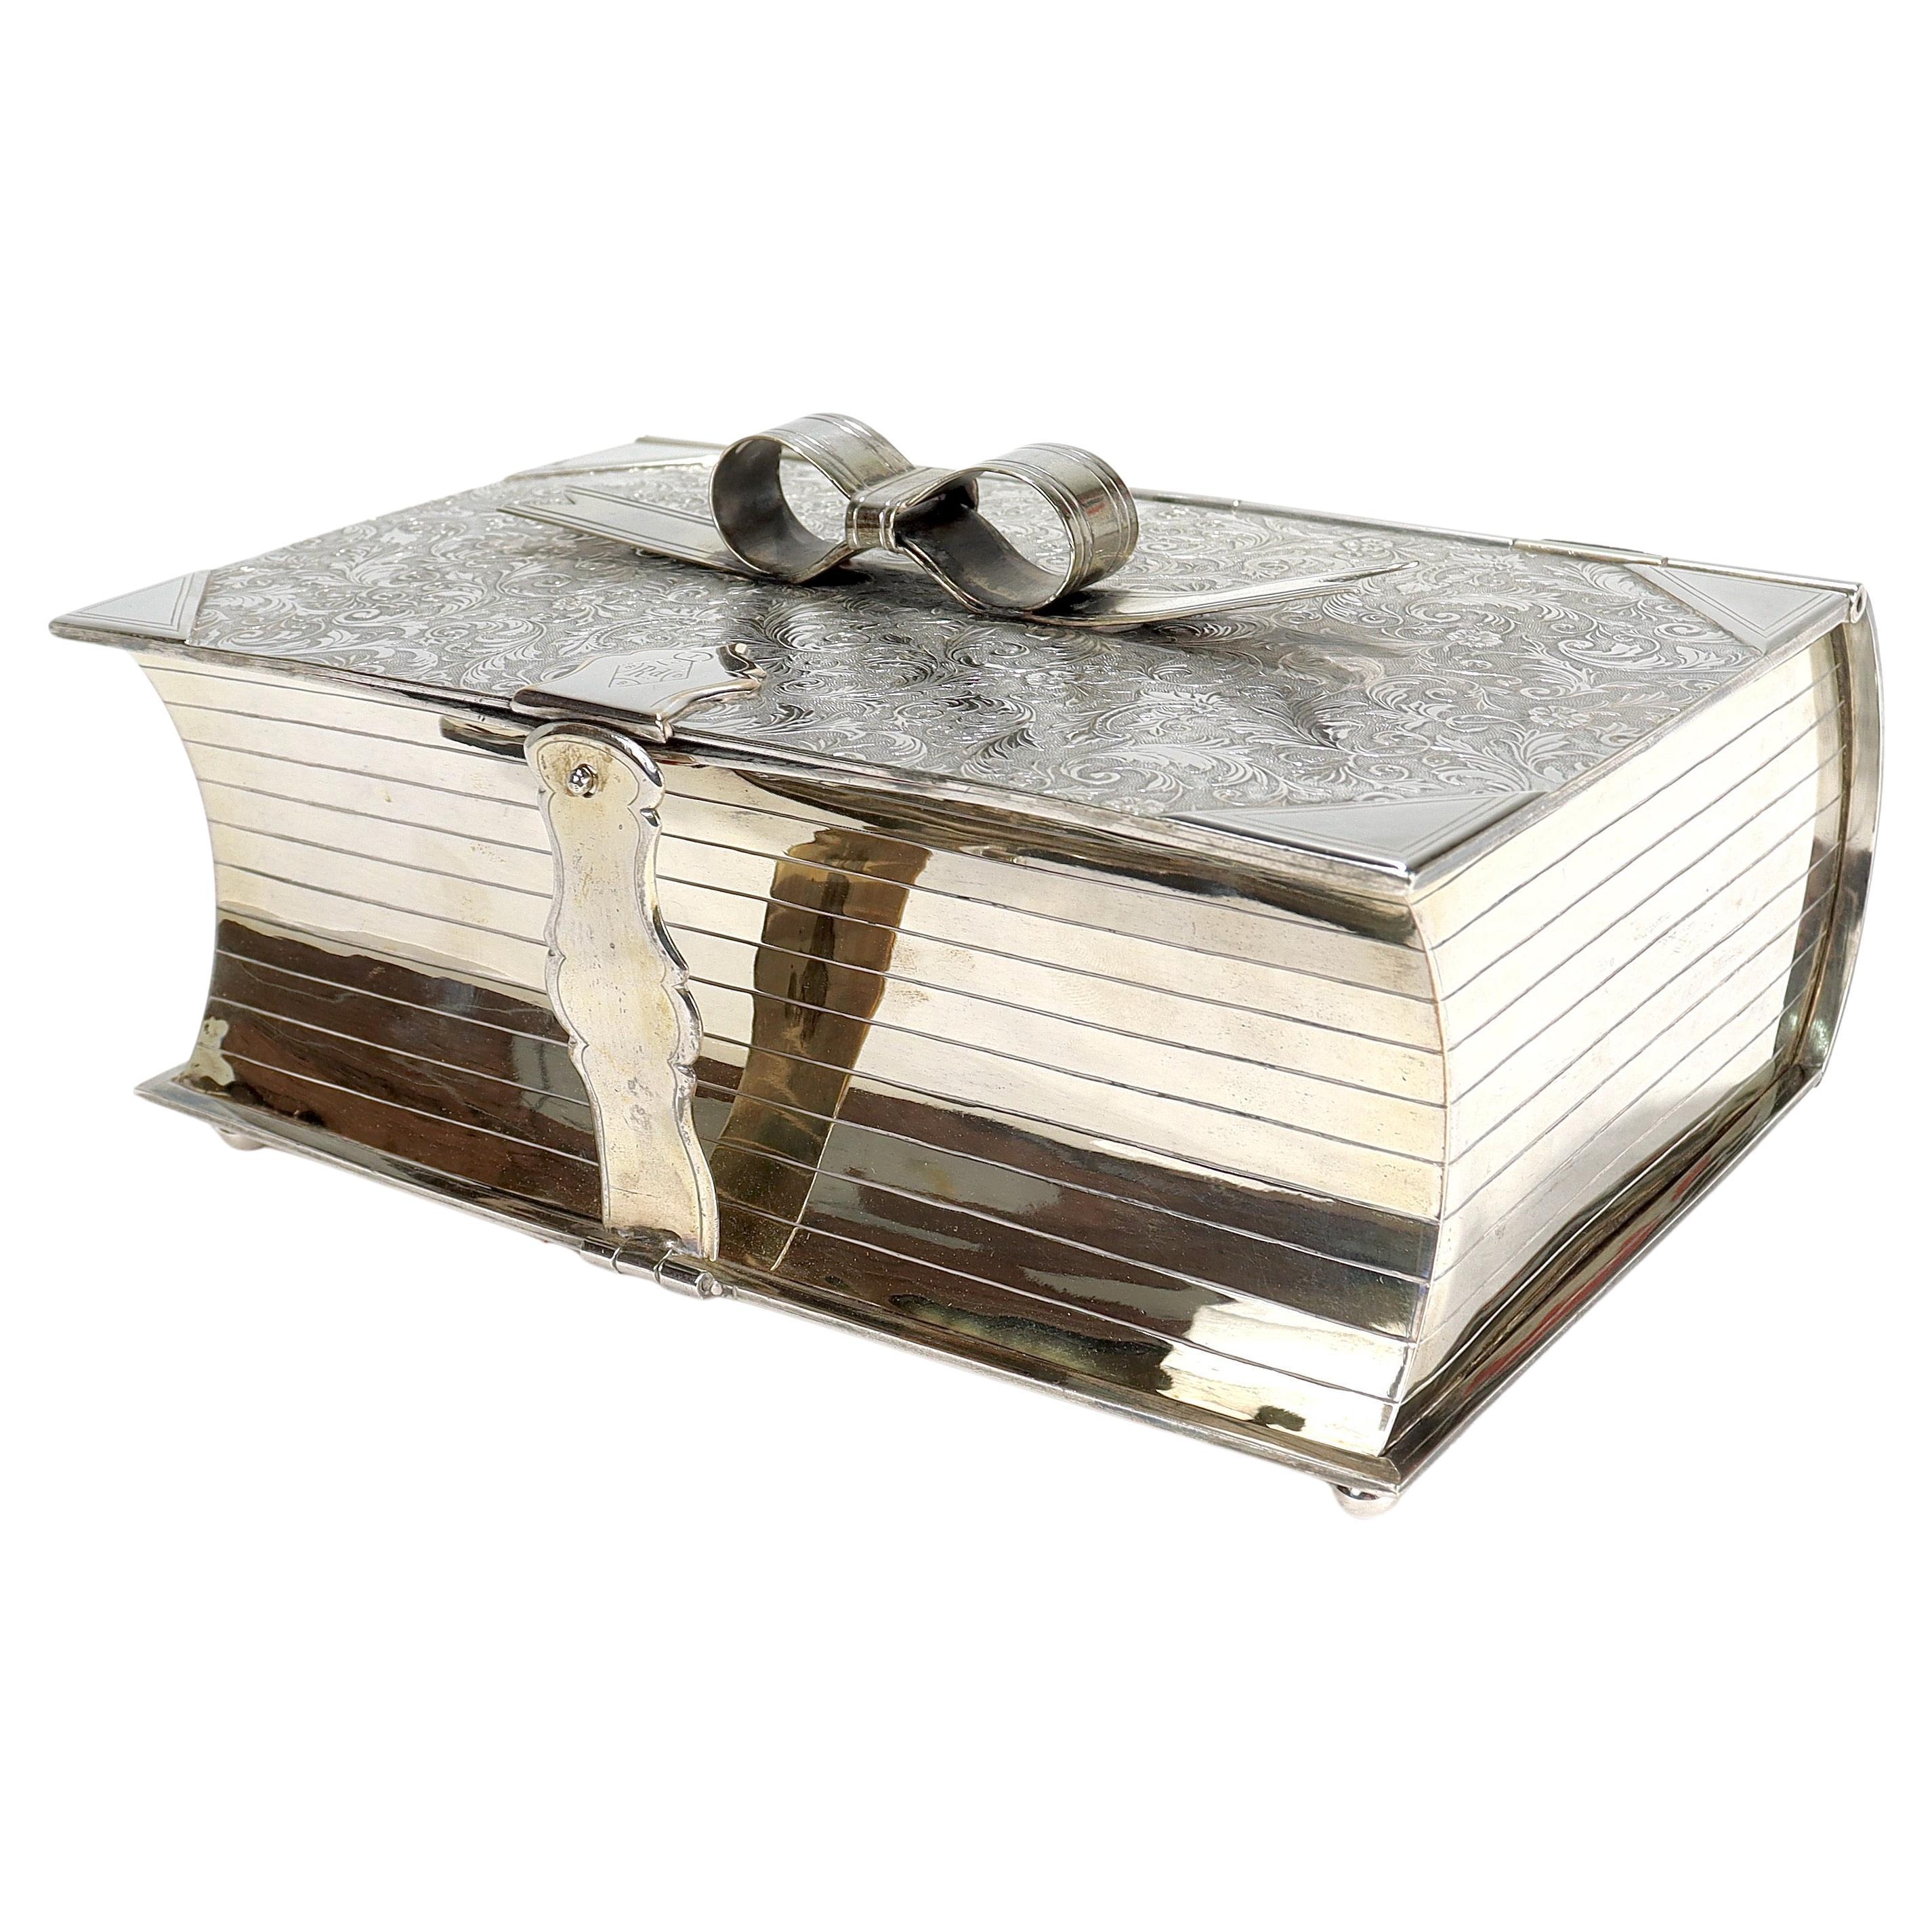 A fine antique figural Victorian silver plated humidor.

In the trompe l'oeil form of a book marked 